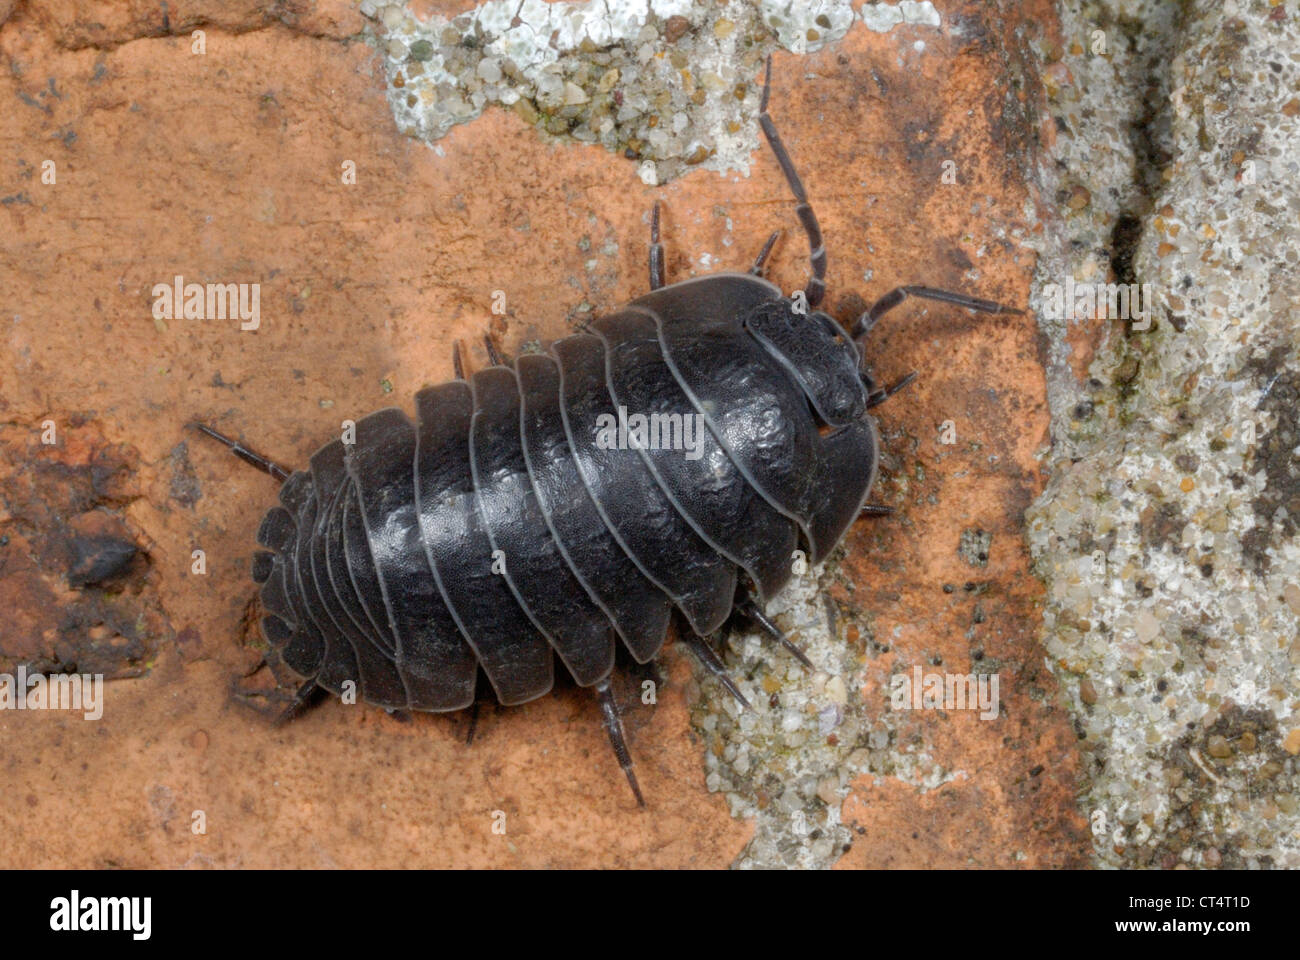 Southern Pill Woodlouse (Armadillidium depressum) on an old brick wall in a suburban garden in Gorseinon, South Wales. May 2012. Stock Photo